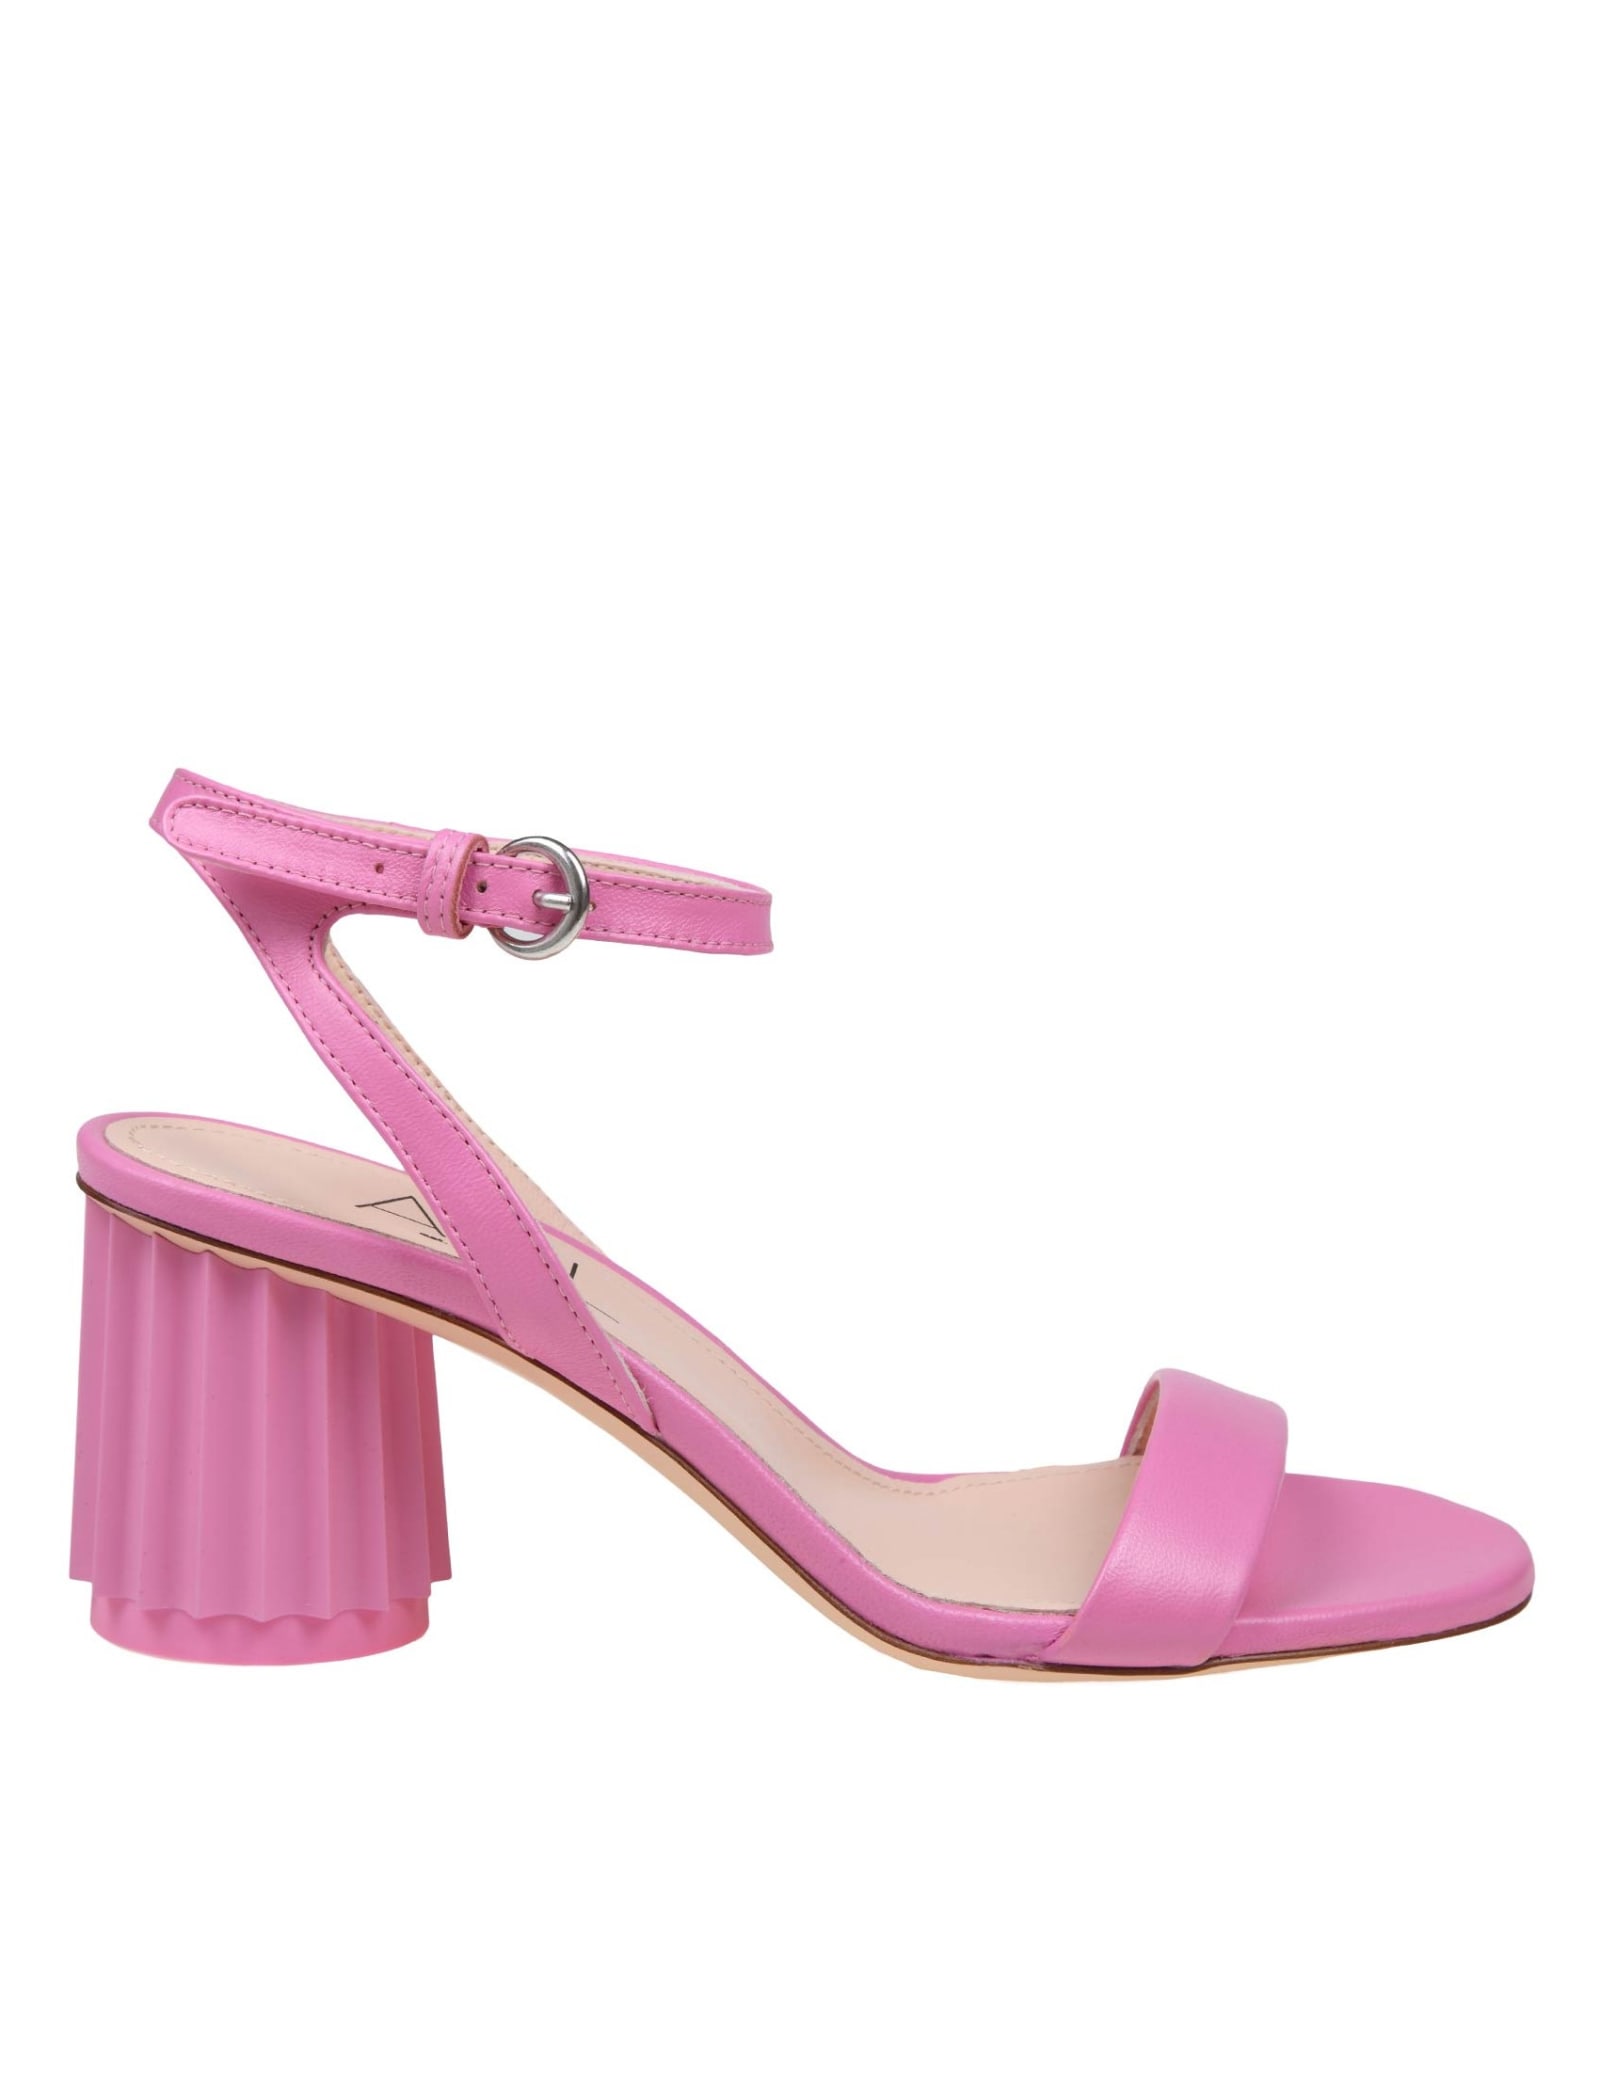 Pink Leather Sandal With Column Heel